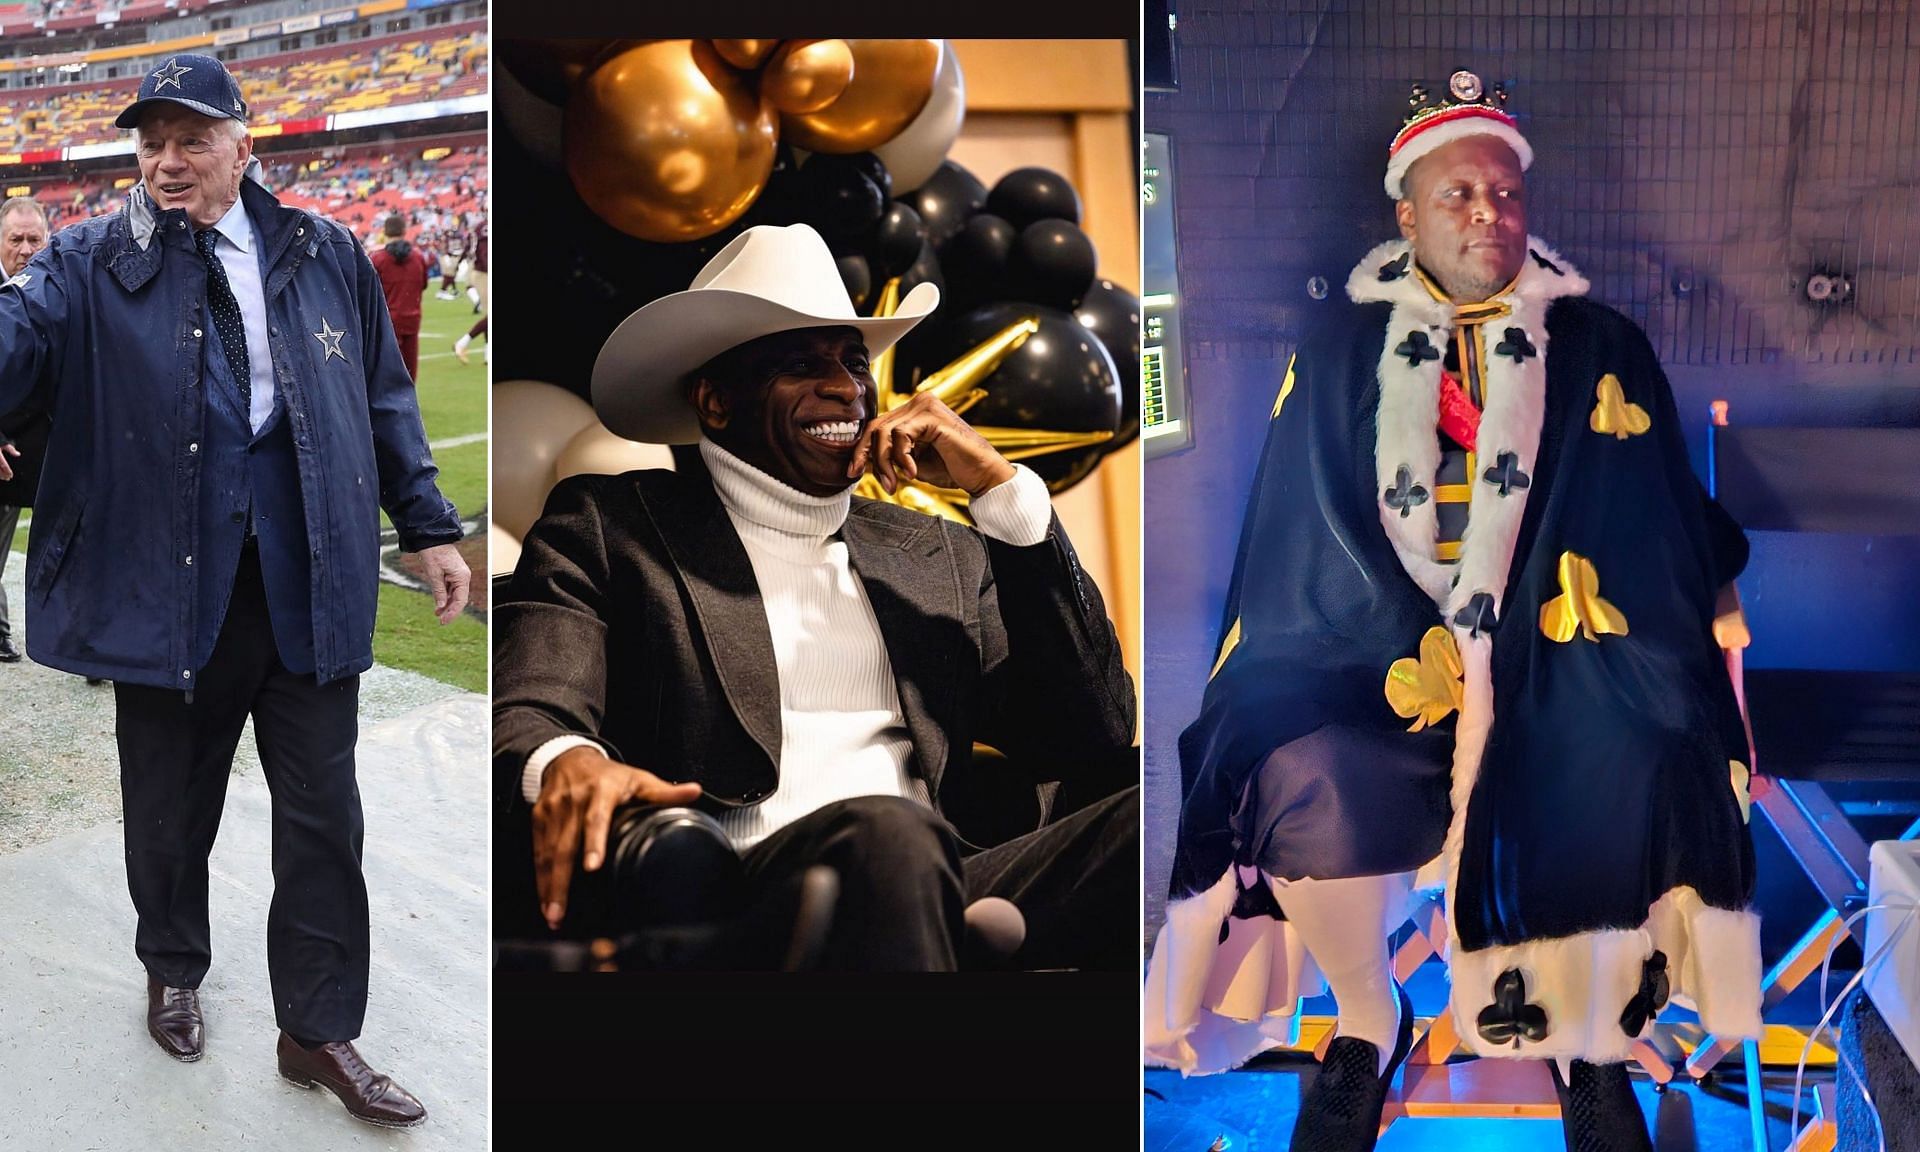 Deion Sanders and co. share moments with biggest stars from the NFL world ft. Barry Sanders, Jerry Jones, and more